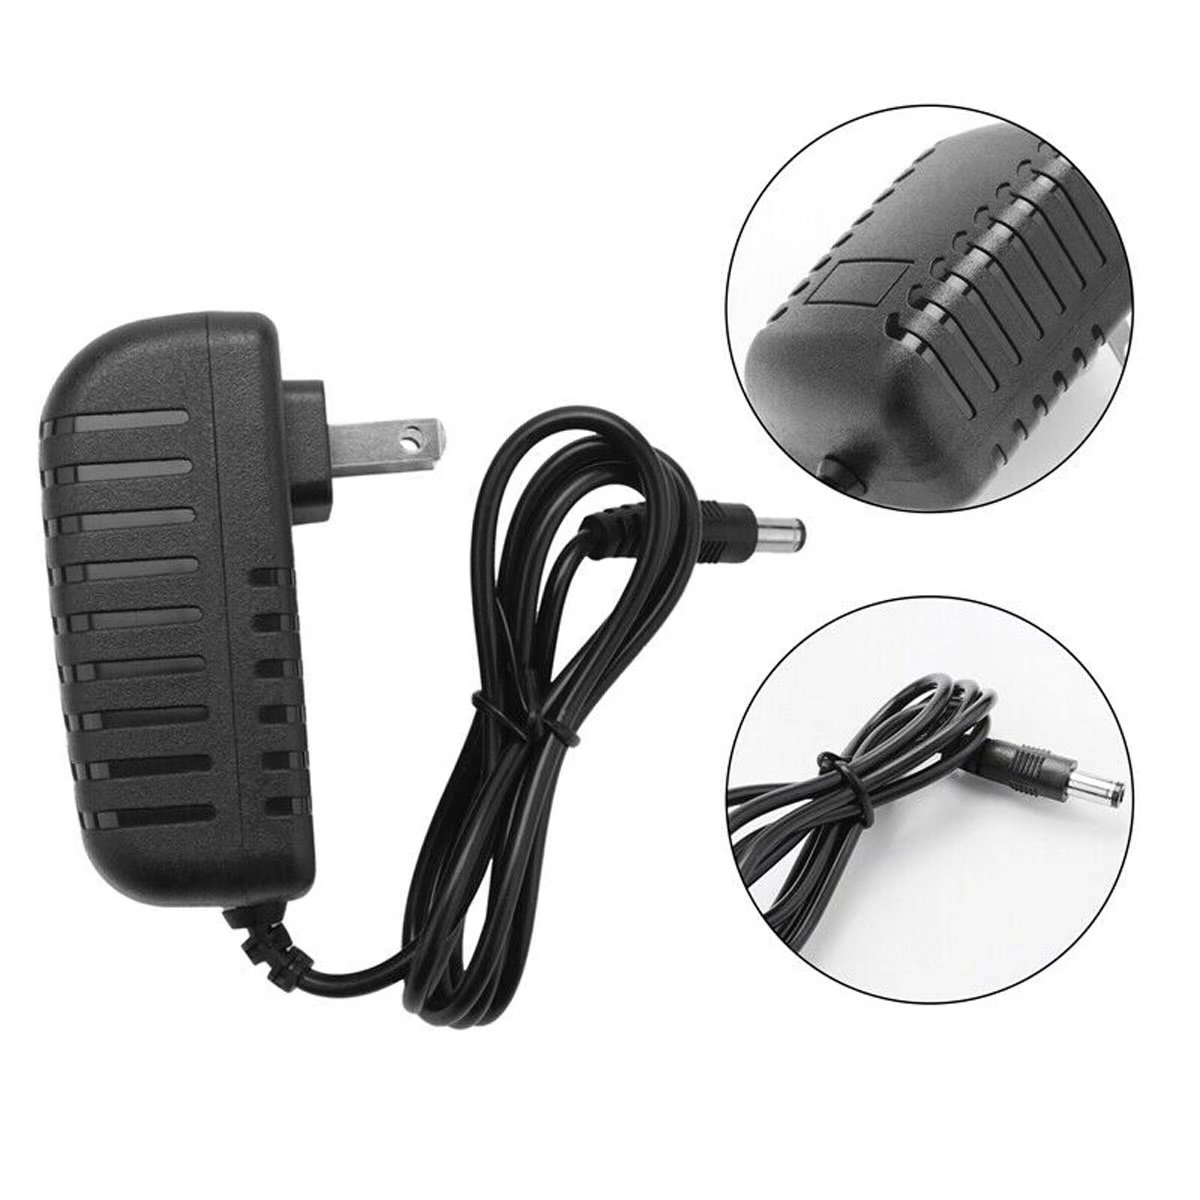 AC Adapter Charger for 18V Legiral Le9 Pro (NOT fit 24V Version) Massage Gun Deep Tissue Body Muscle Percussi - image 2 of 4